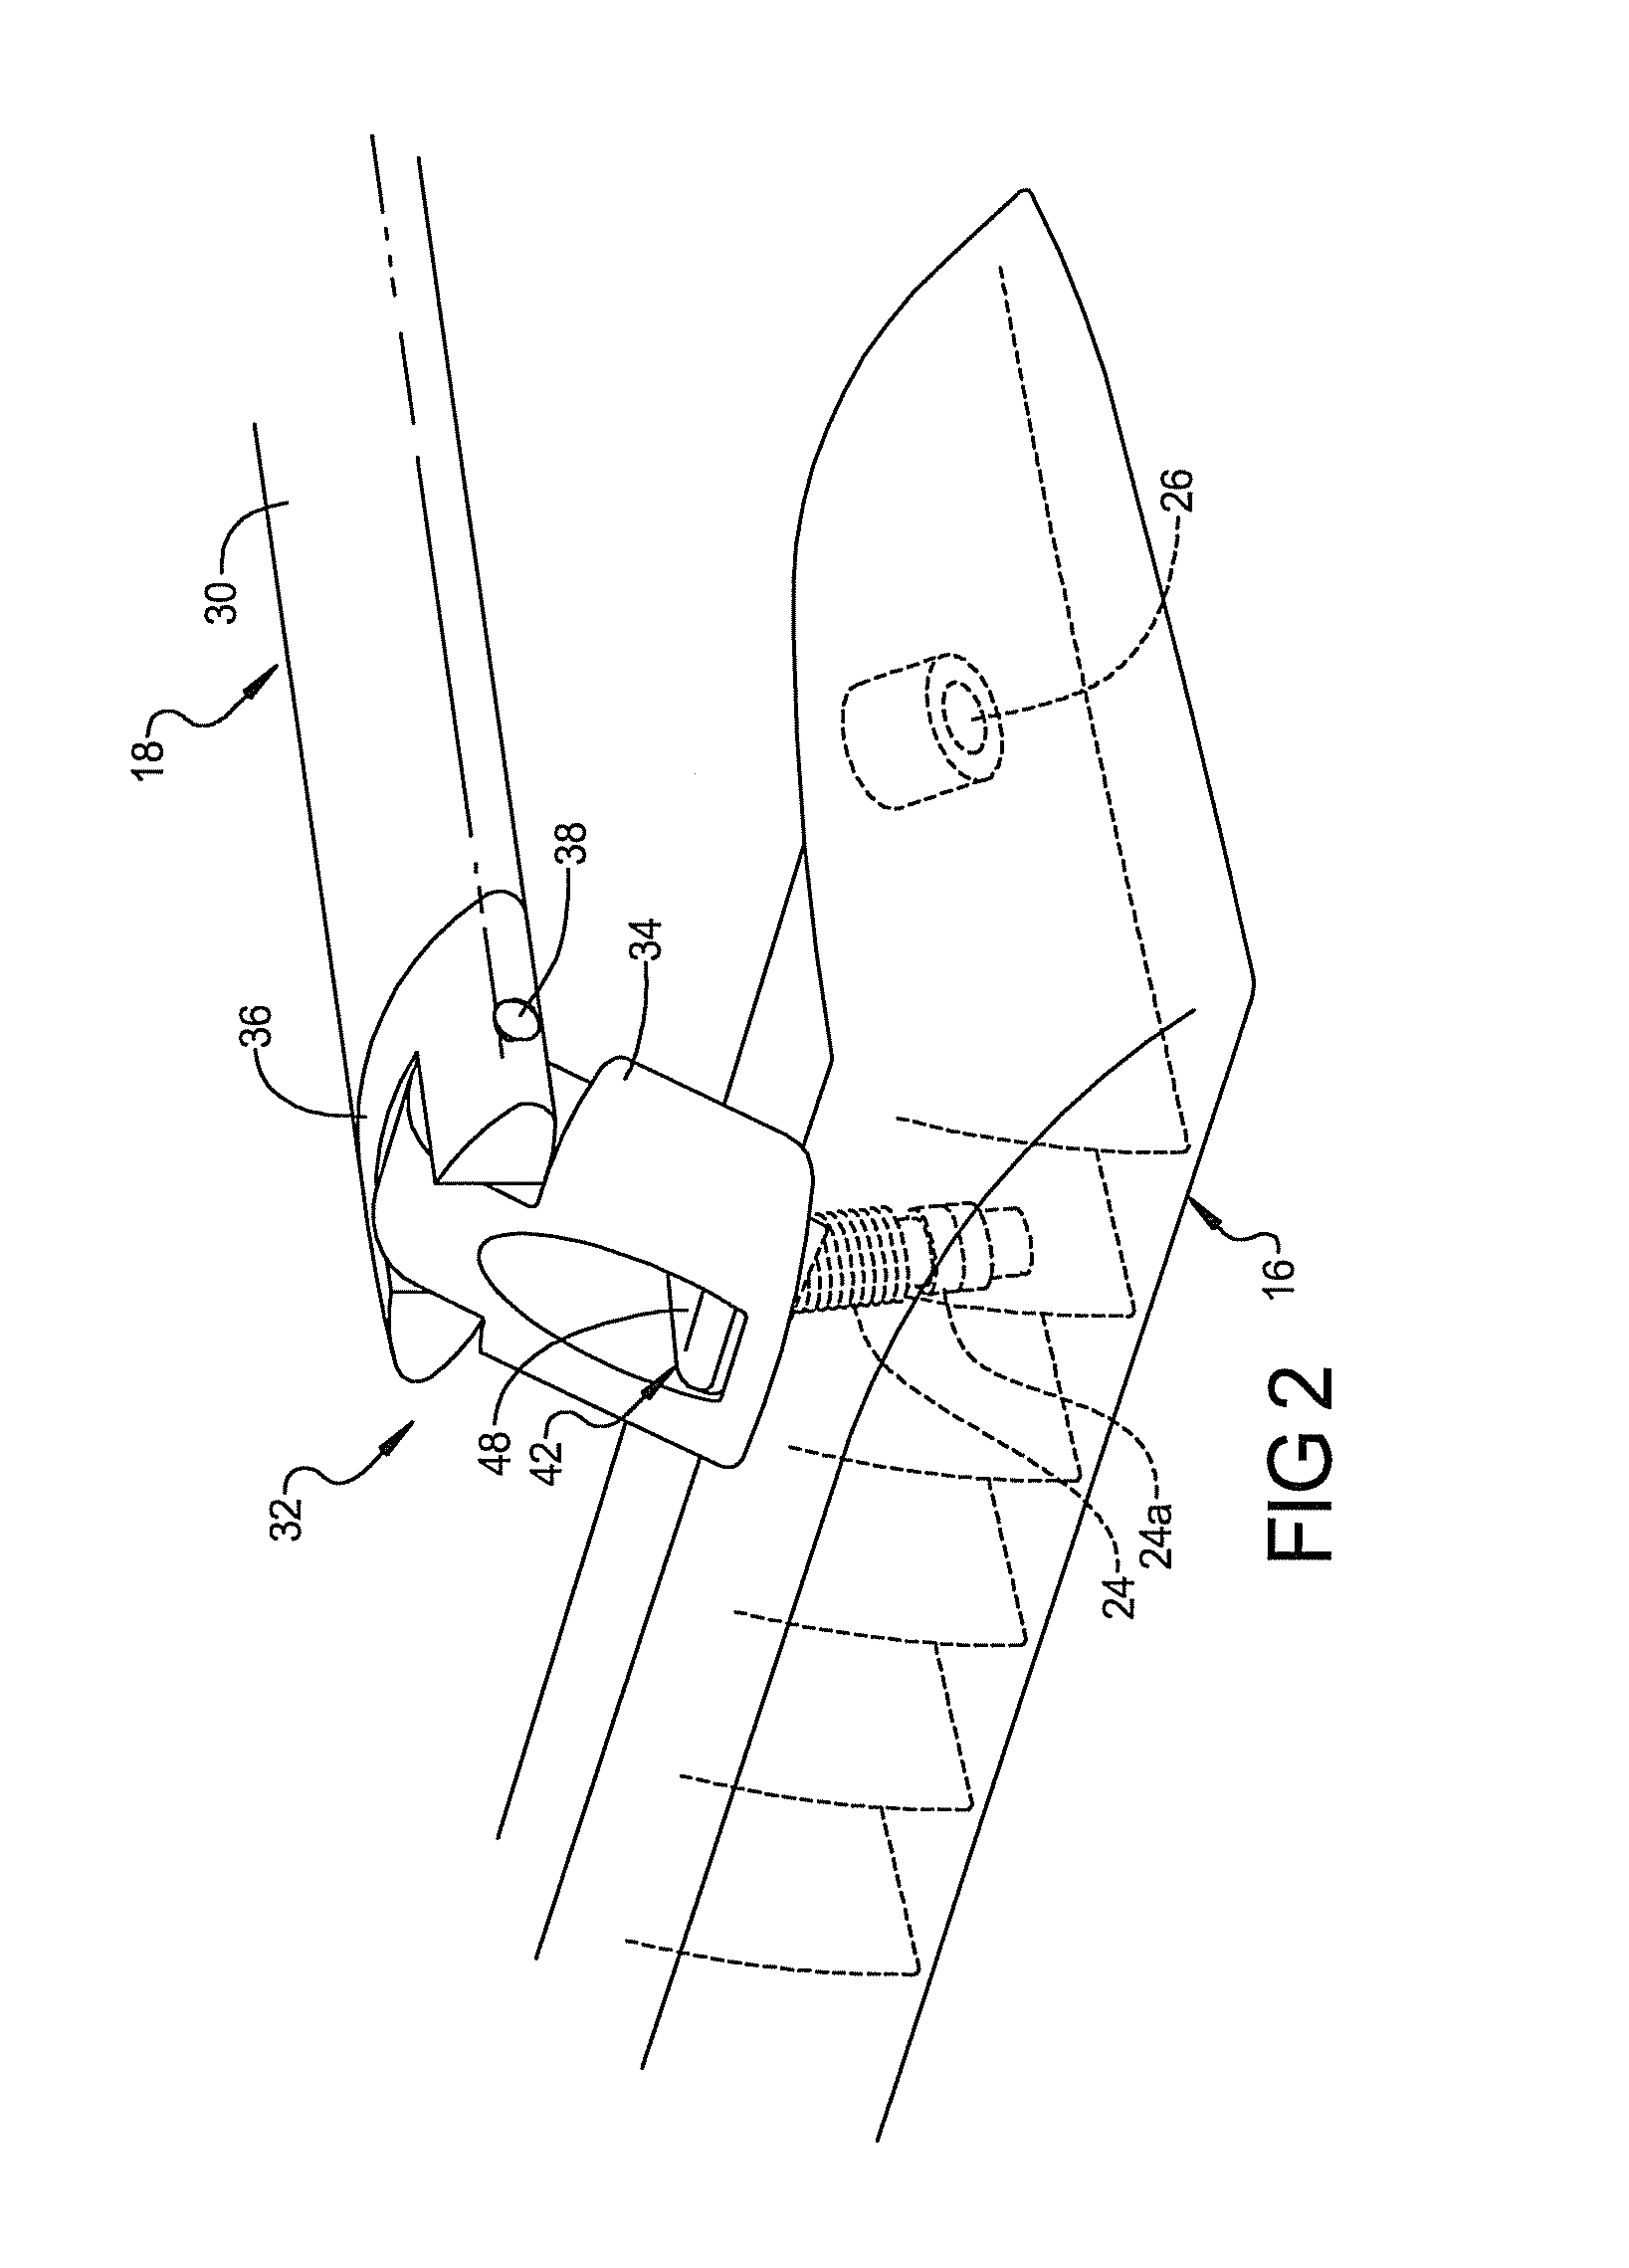 System and method for vehicle article carrier having stowable cross bars